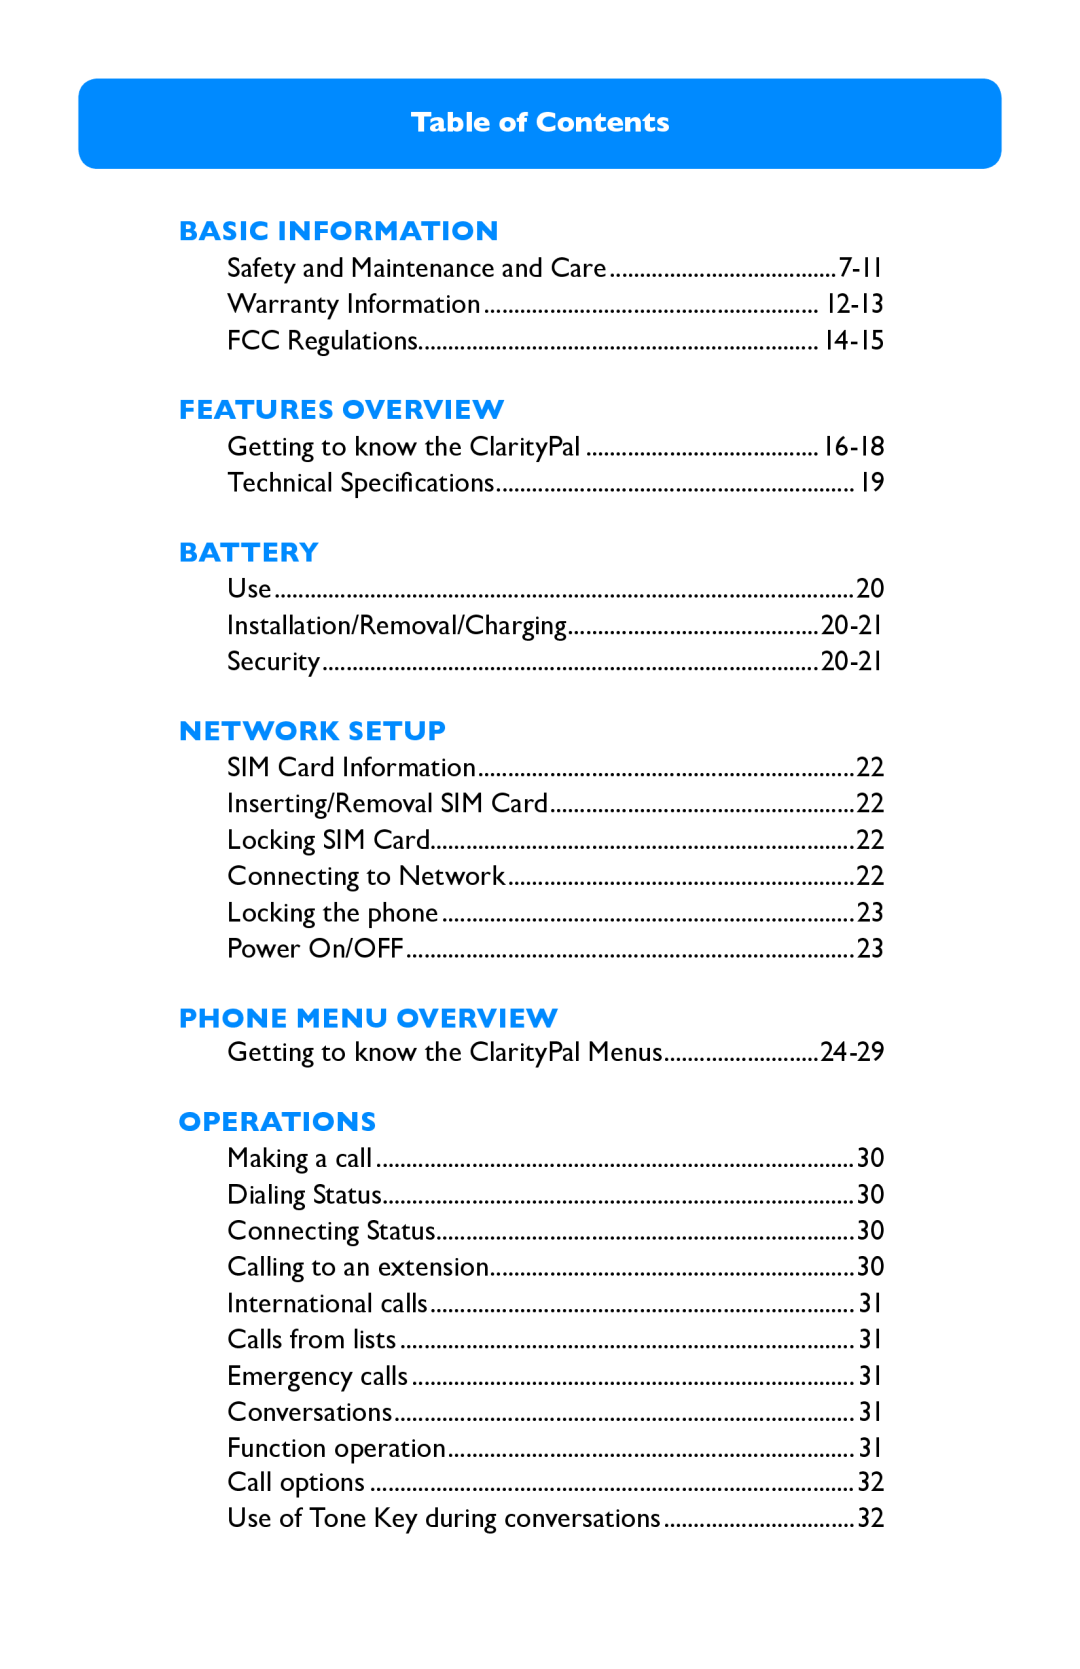 Clarity Pal Table of Contents, 7-11, Basic Information, Features Overview, Battery, Network Setup, Phone Menu Overview 